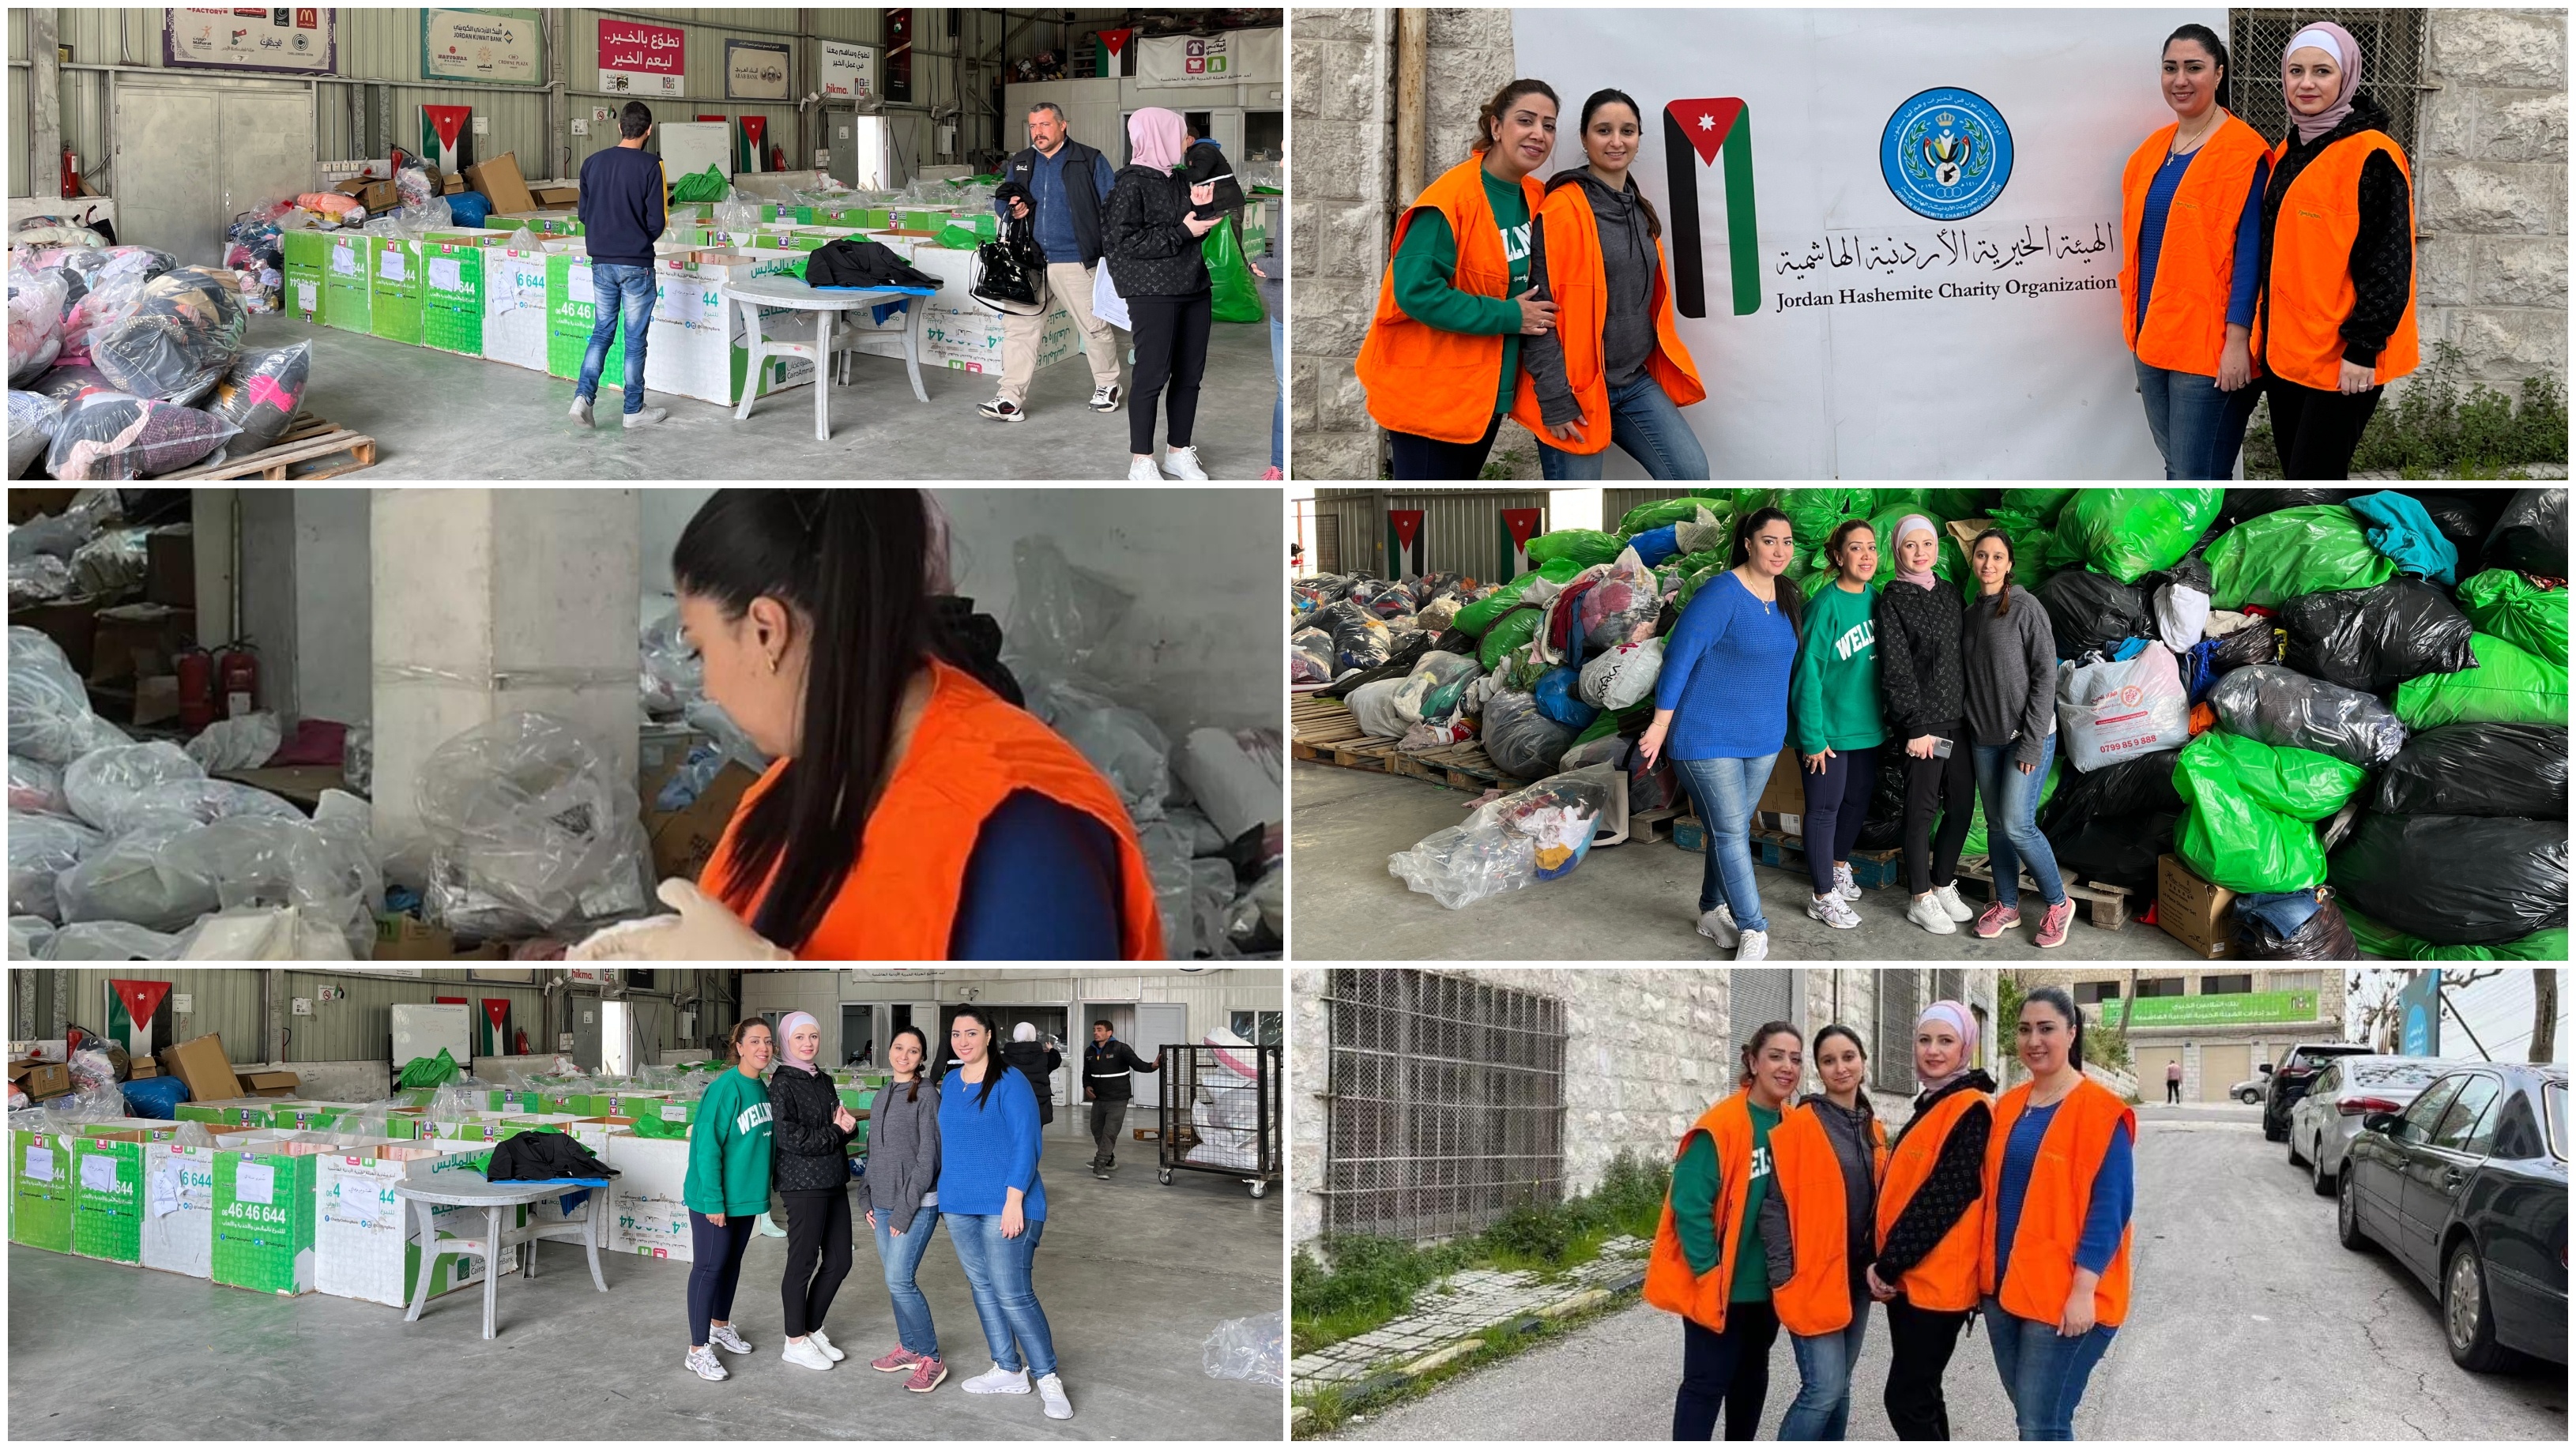 JLGC participates in a campaign to prepare parcels for the benefit of chaste families